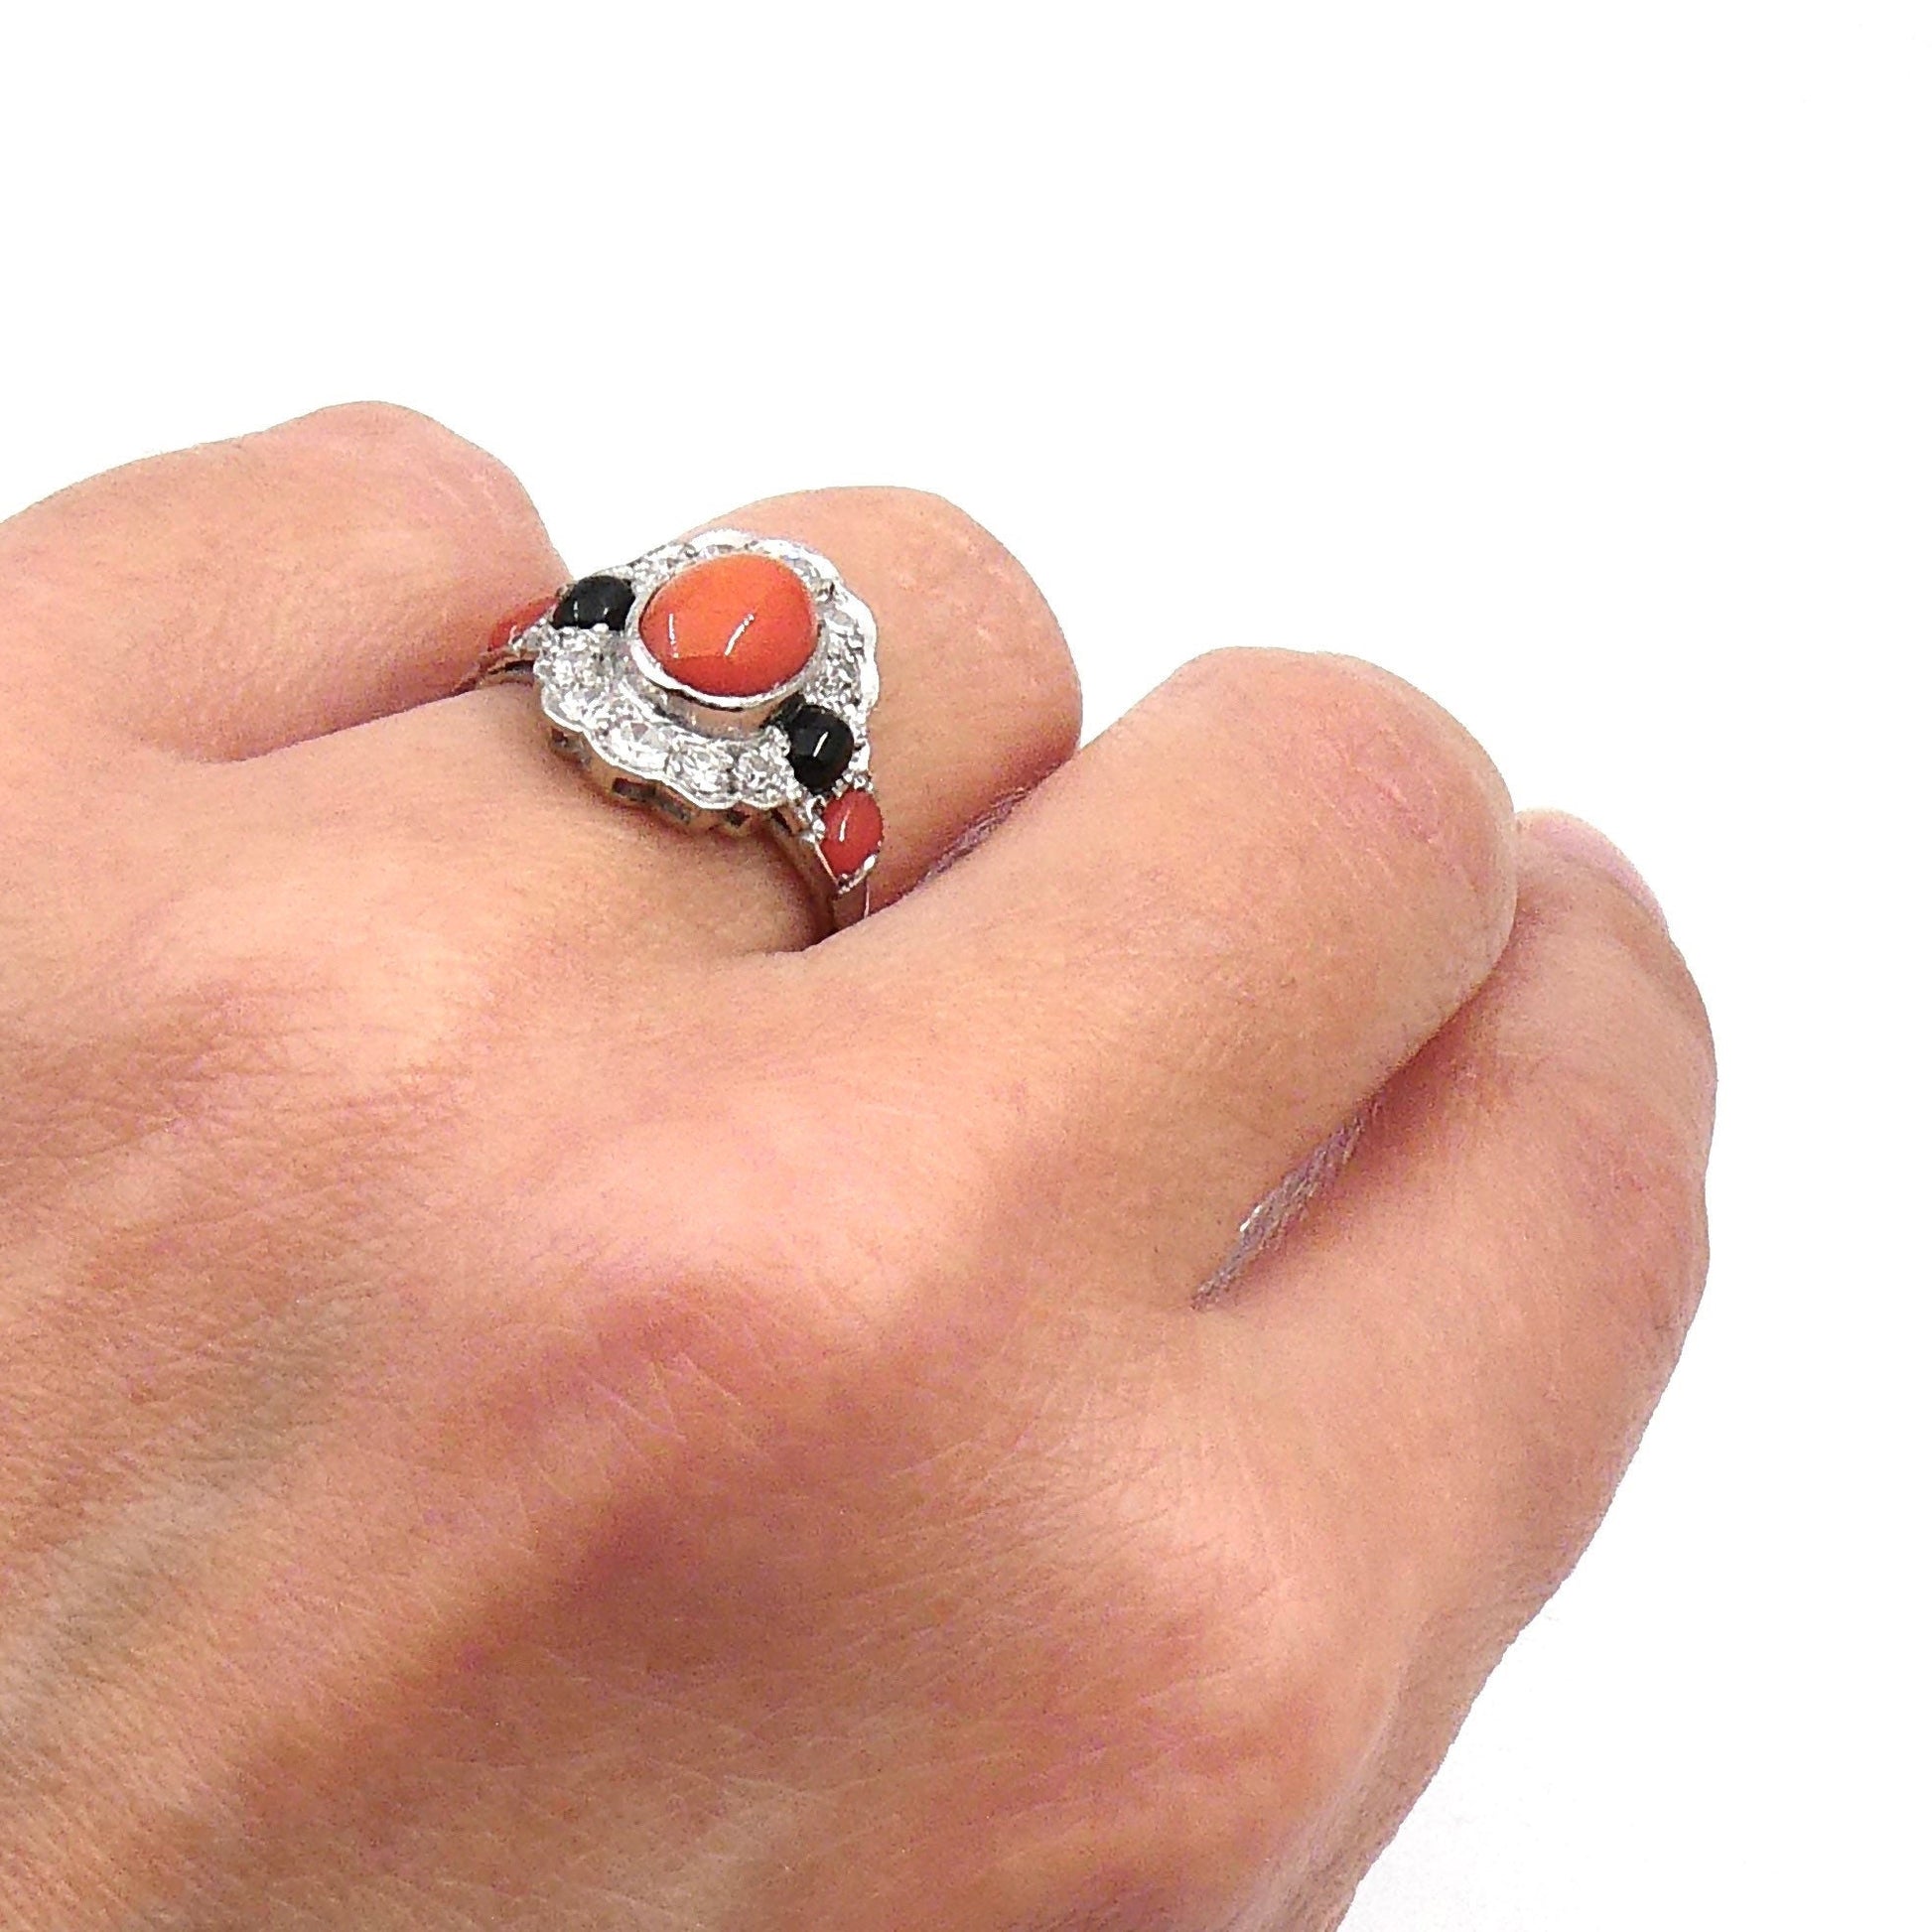 Vintage coral ring, set with onyx and diamonds, an art deco style onyx ring. - Collected